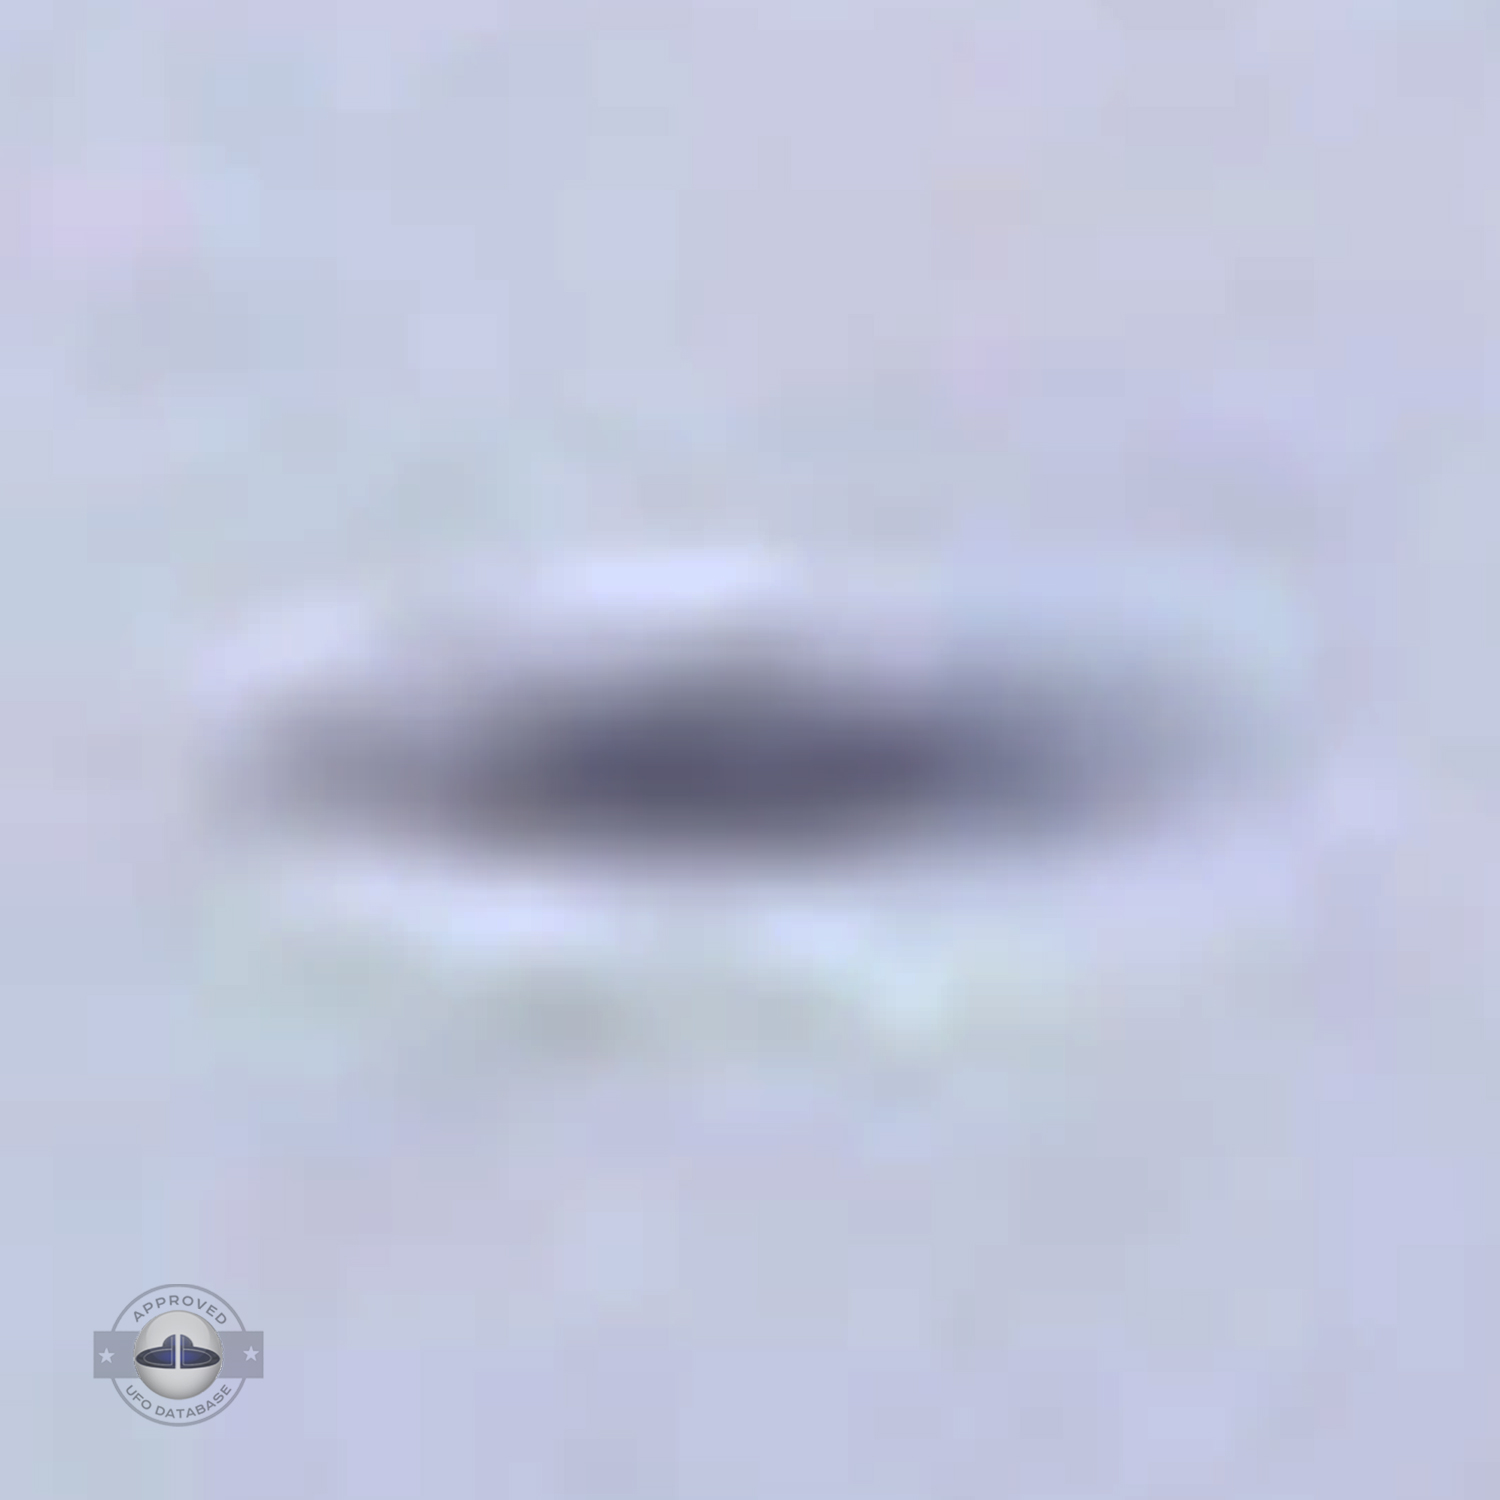 Brazil UFO Sighting | UFO picture captured from bedroom window | 2011 UFO Picture #169-7